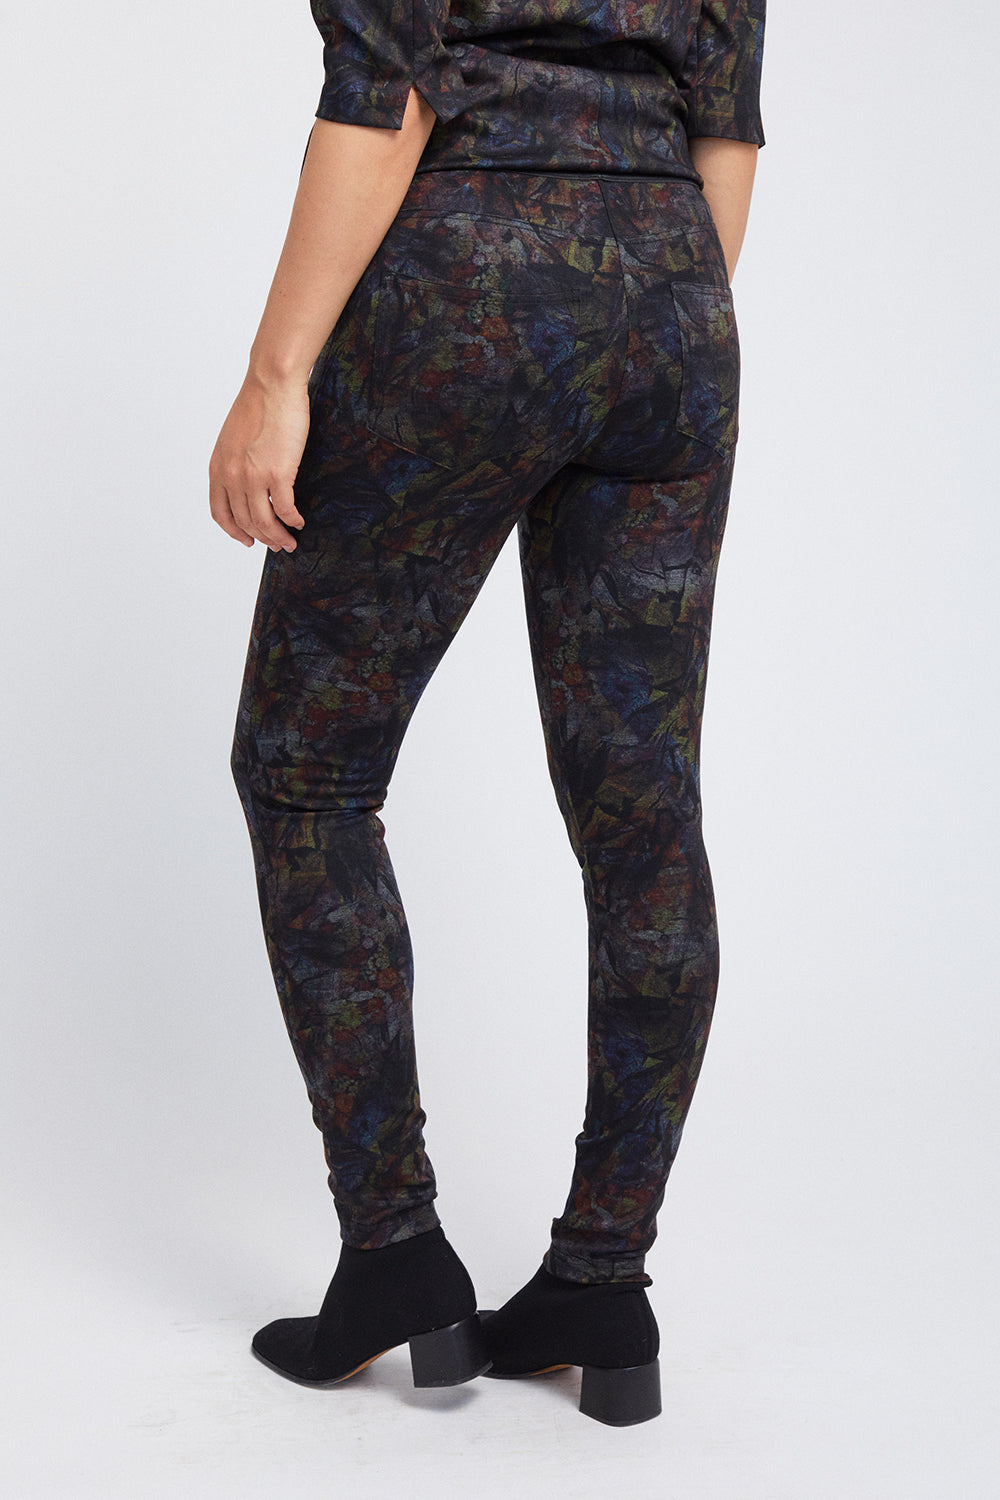 Jade Jegging - Stained Glass: FINAL SALE